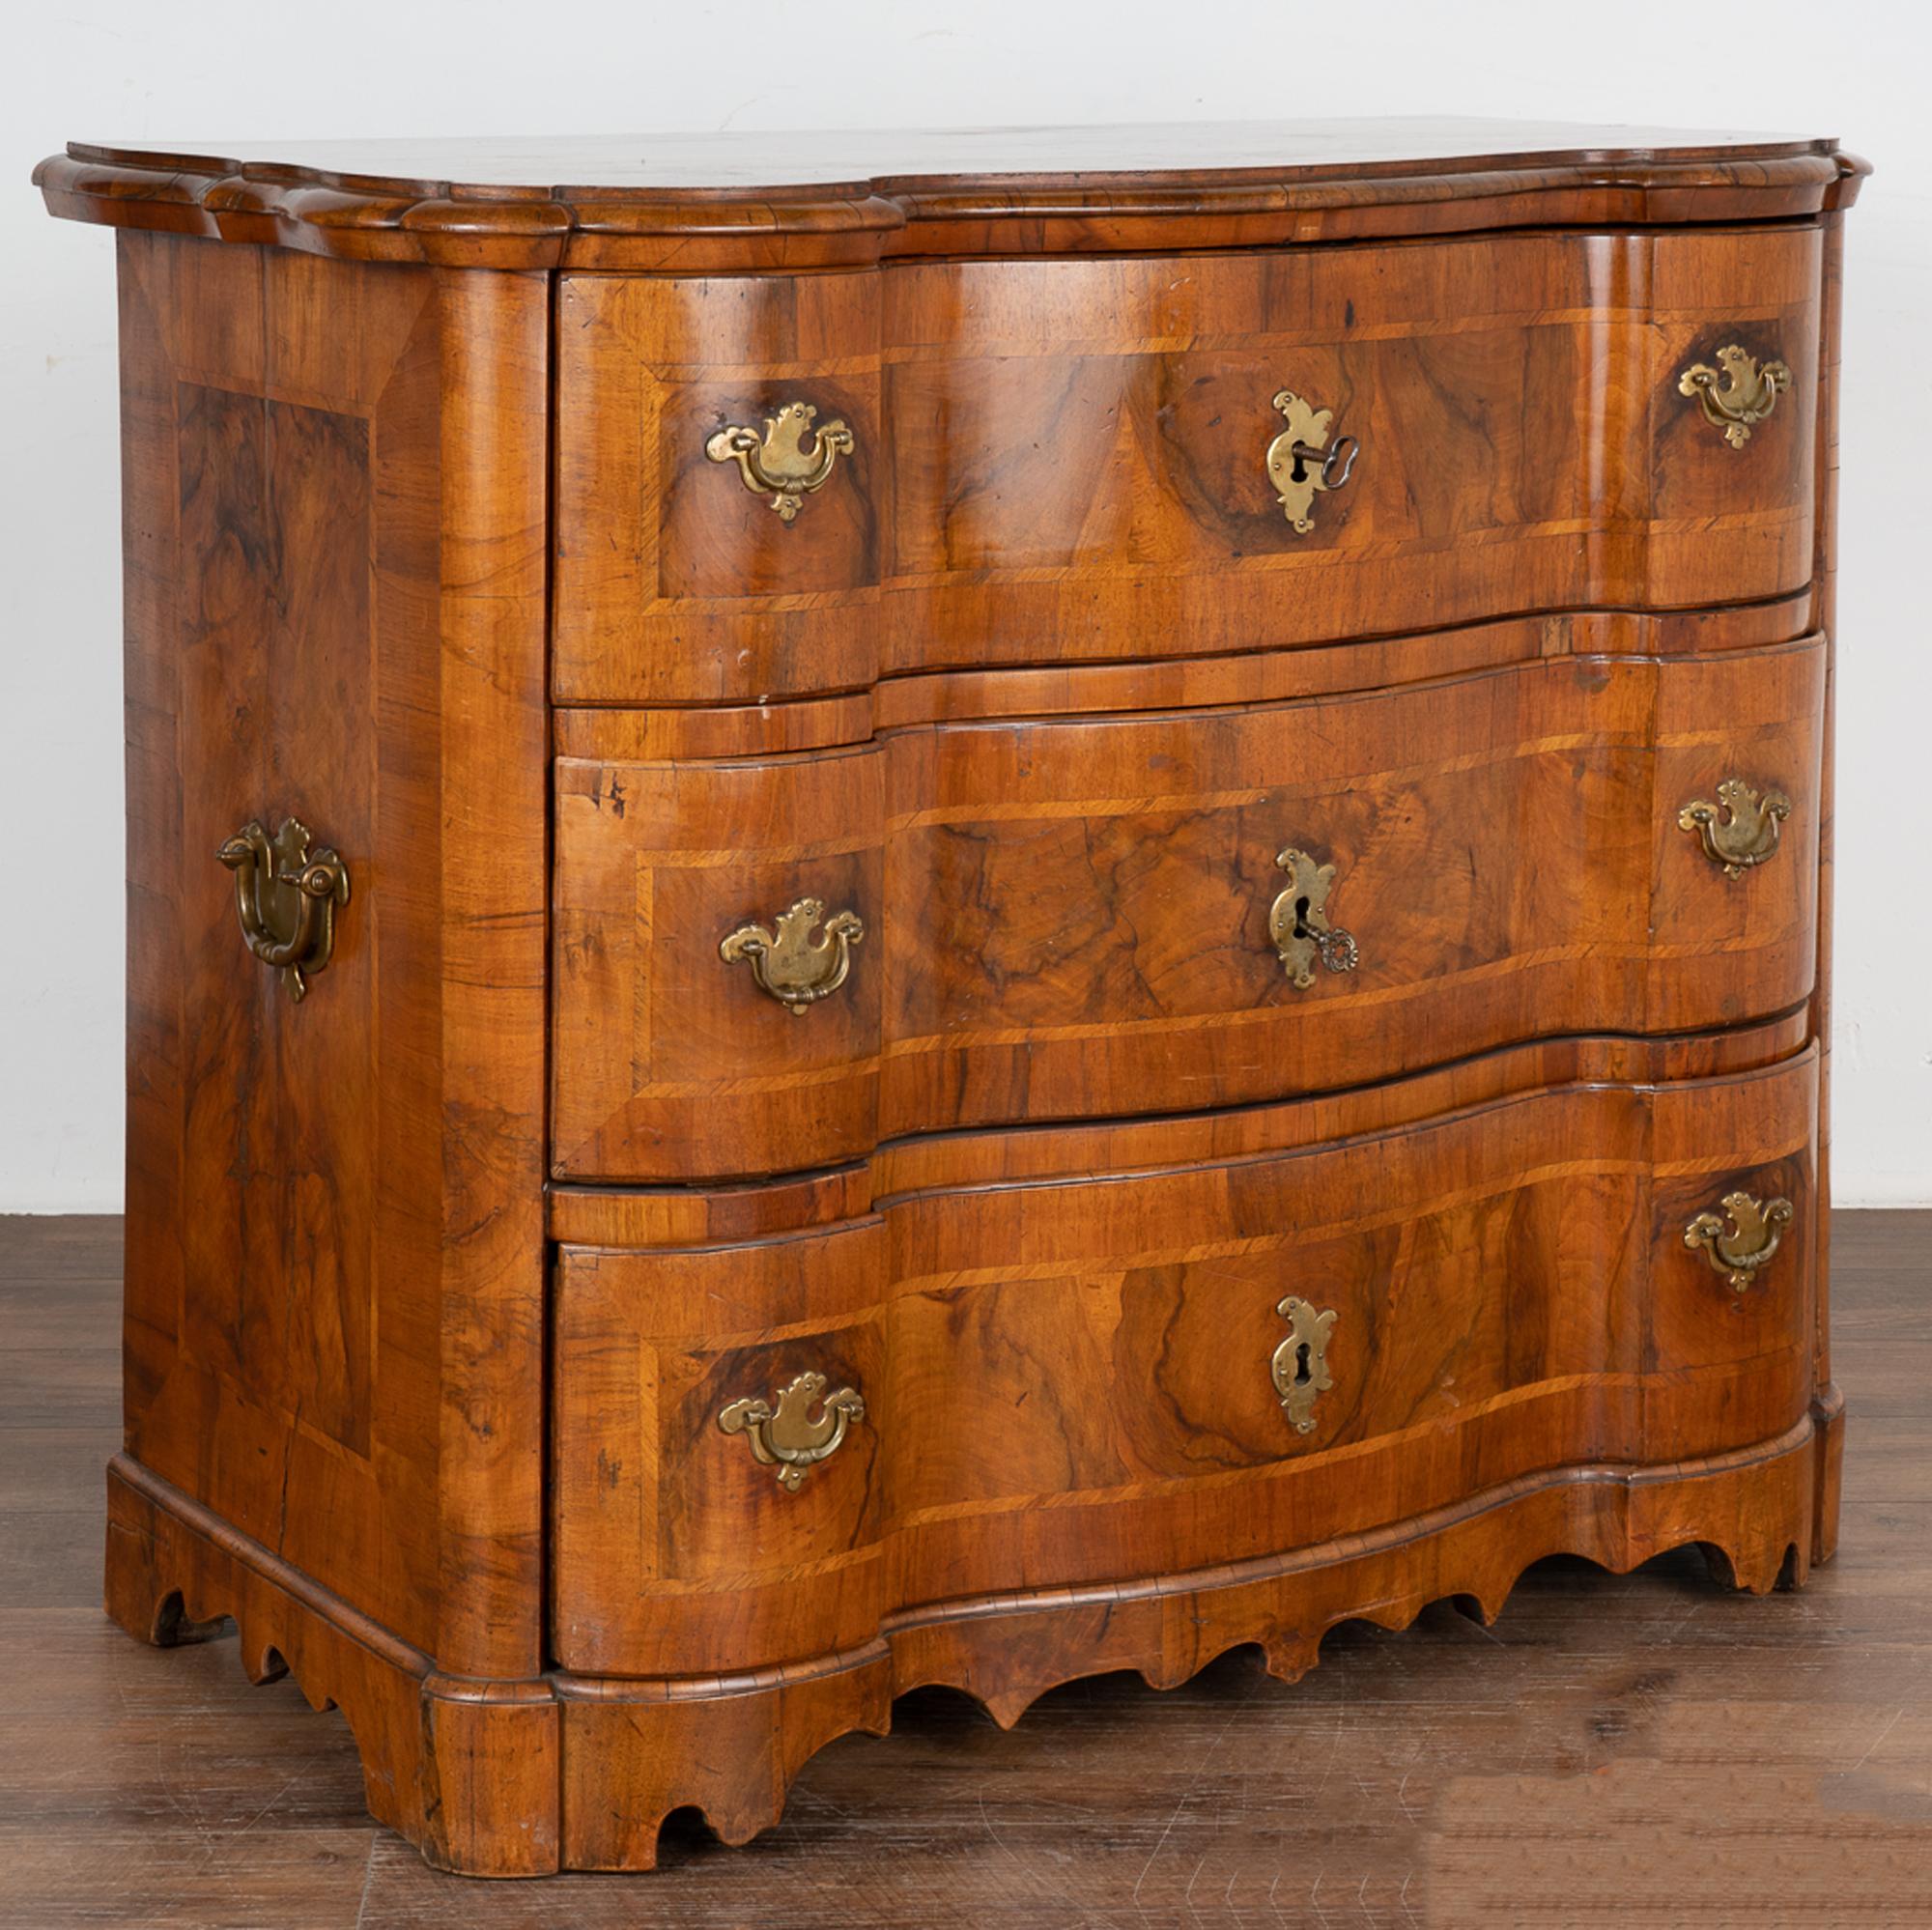 Large handsome baroque oak chest of drawers veneered with walnut and elm, curved front with three drawers.
Brass hardware including side handles, drawer pulls and keyhole covers.
Two brass pulls on each drawer; top drawer locks and opens with heavy